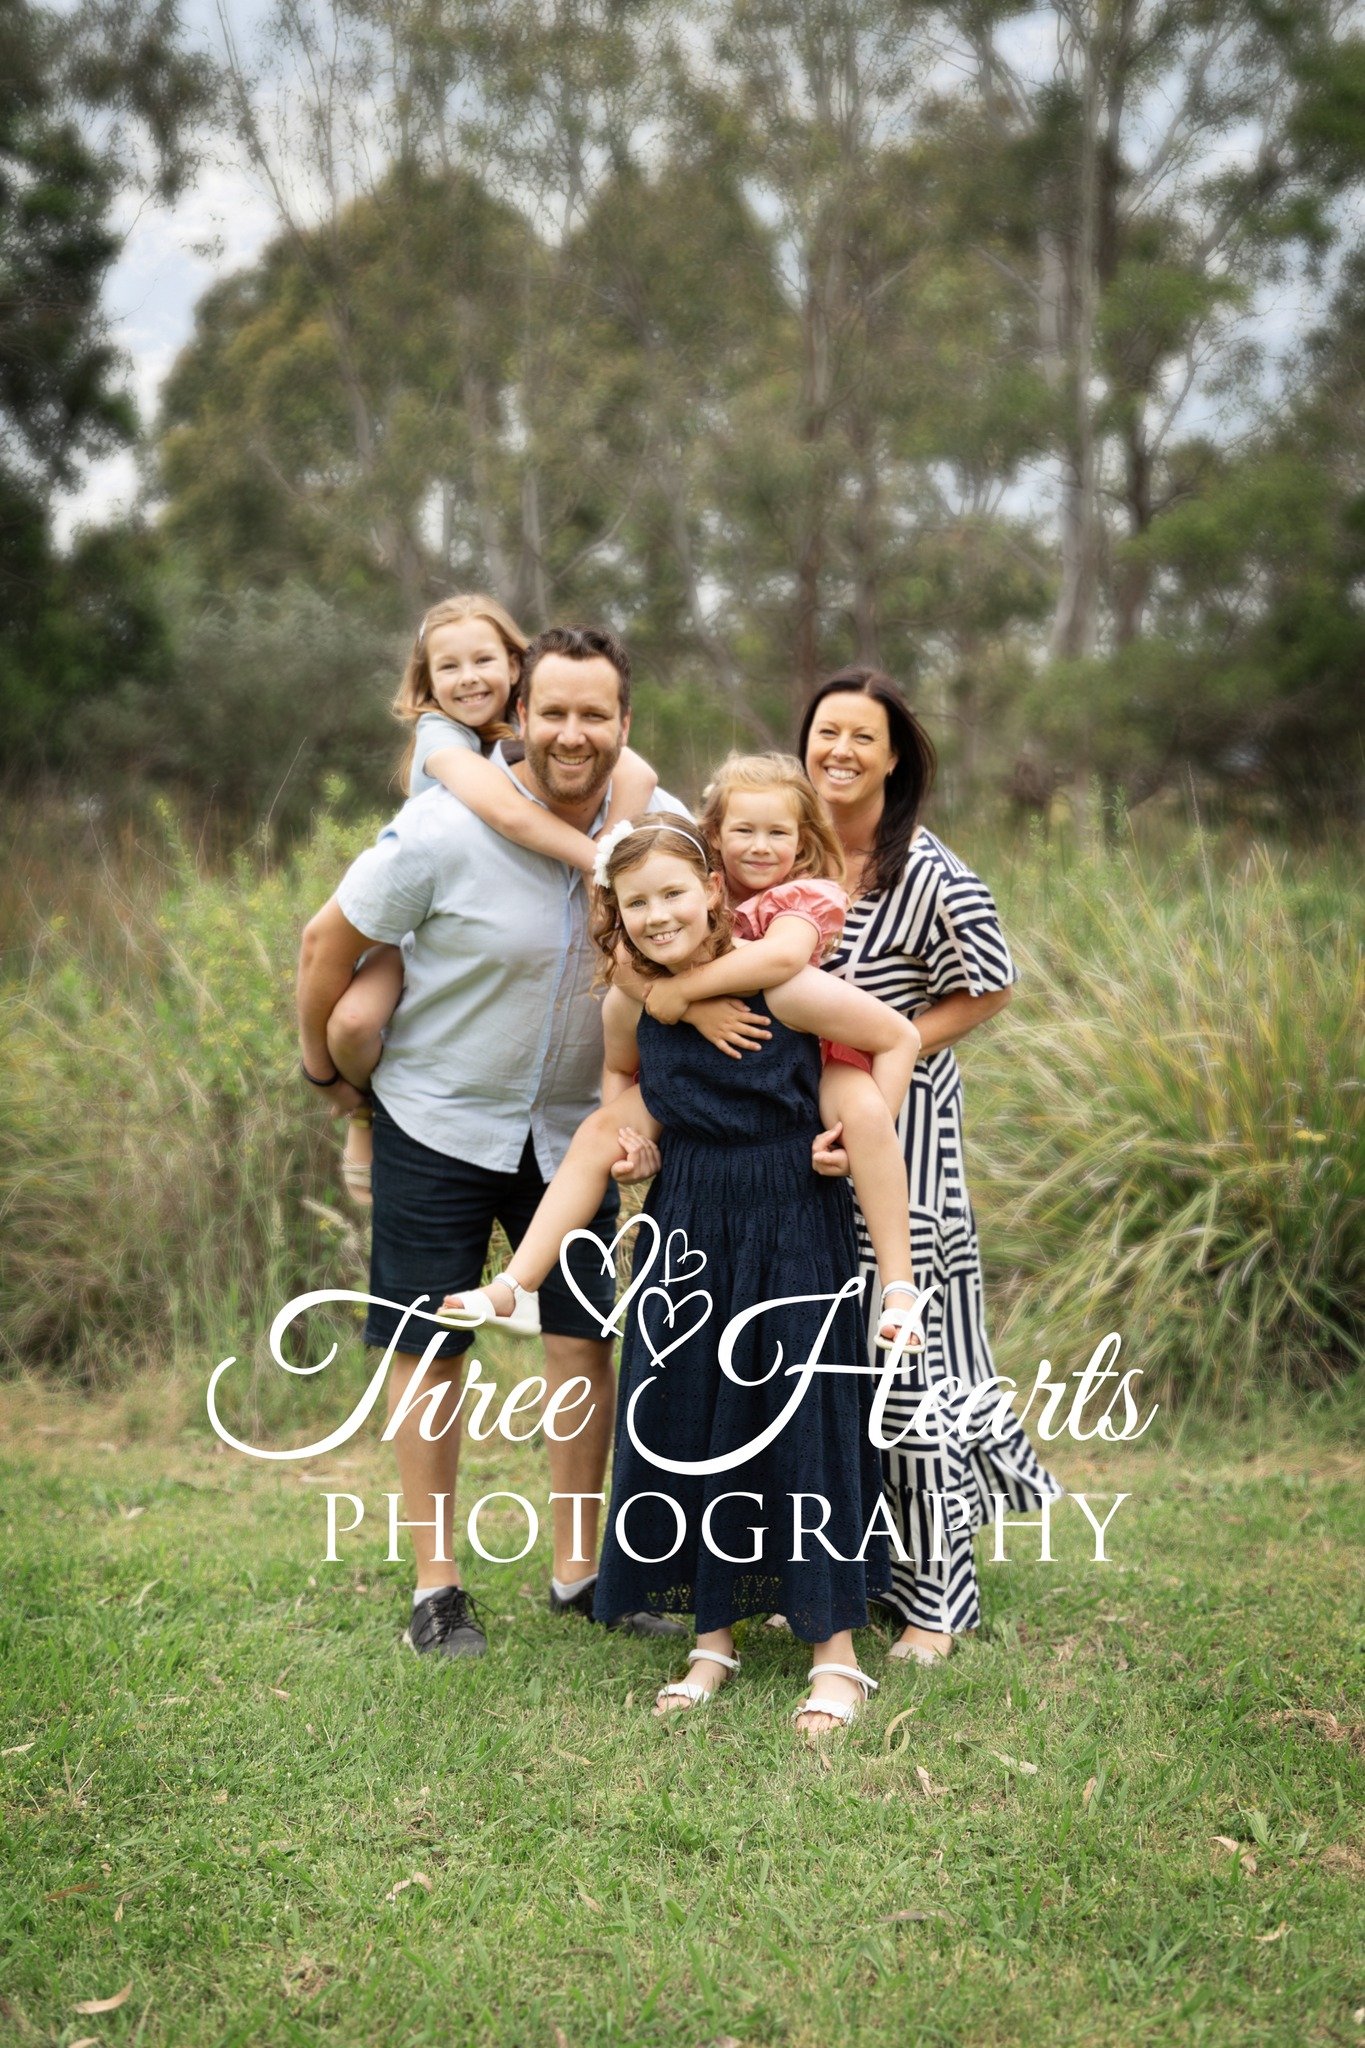 Fun Laughter and smiles!

Capture your family this Mother's Day and ensure you have memories of your kids through every stage of their lives. 

Mother's Day Special, running NOW! - https://accordion-ray-ezaz.squarespace.com/family-photos-mothers-day-